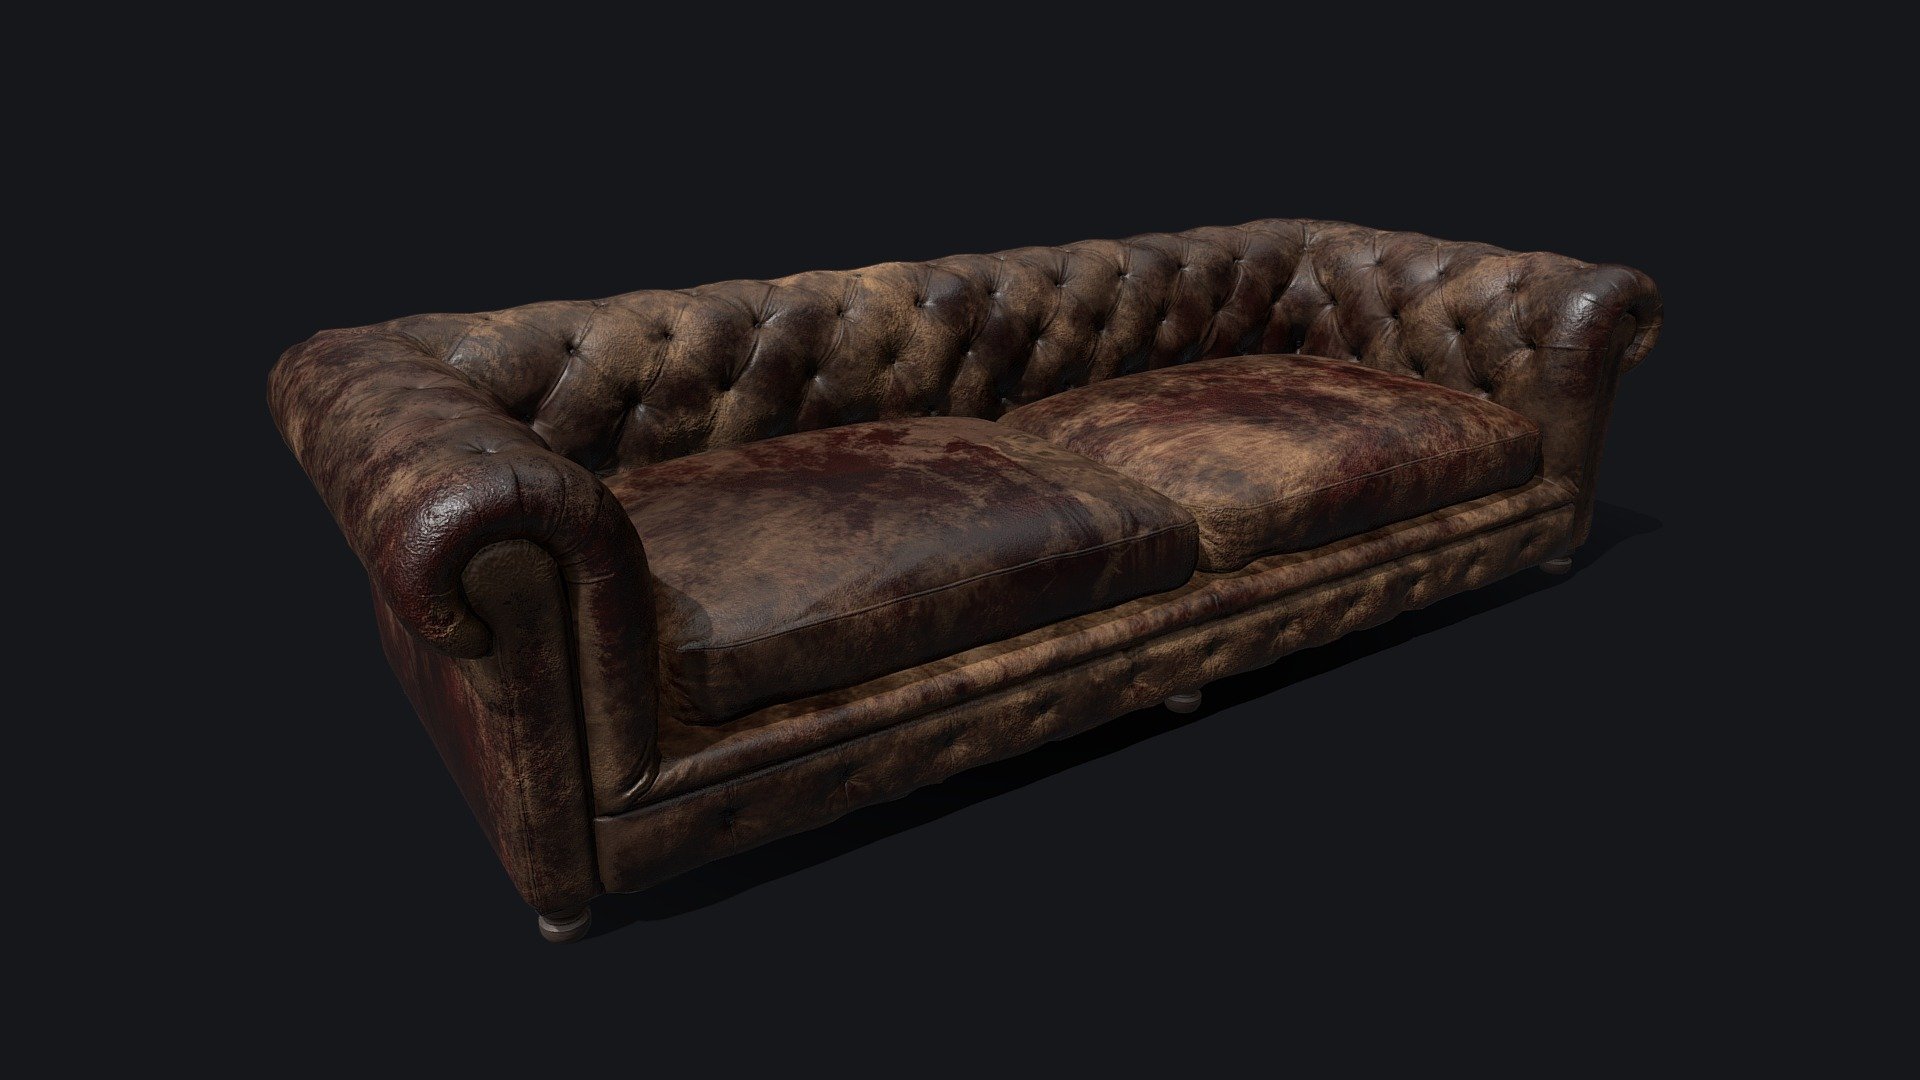 This is an optimized and game ready version of an old and dirty chesterfield sofa. The pillows are split and textured from under also so they can be moved around your scene. Perfect asset for horror or post-apocalyptic games 3d model